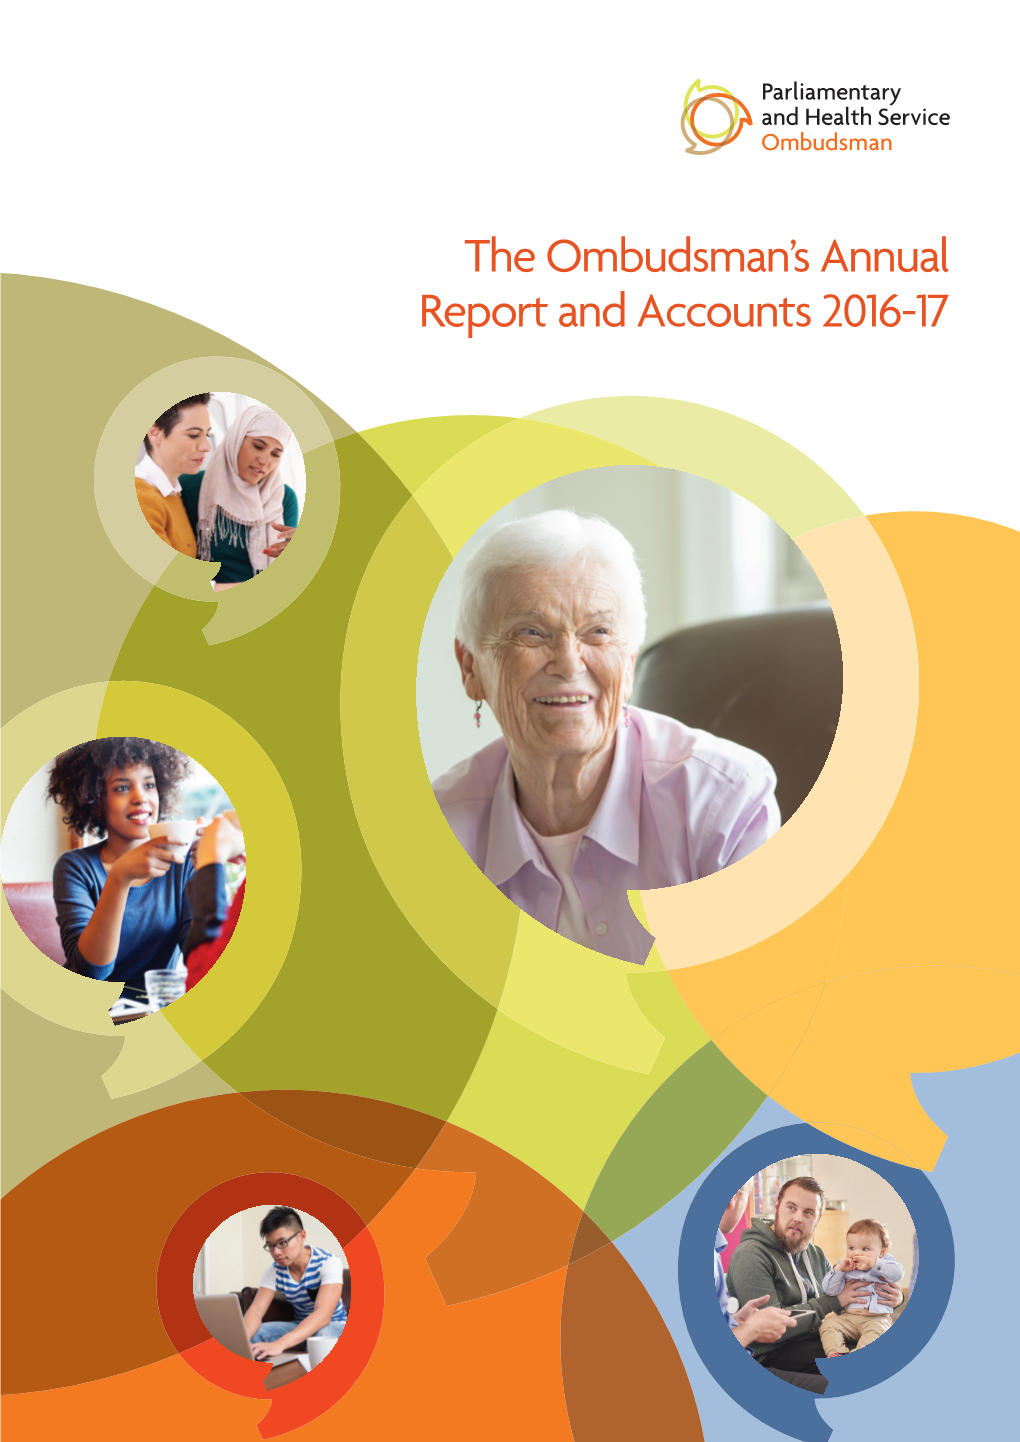 The Ombudsman's Annual Report and Accounts 2016-17